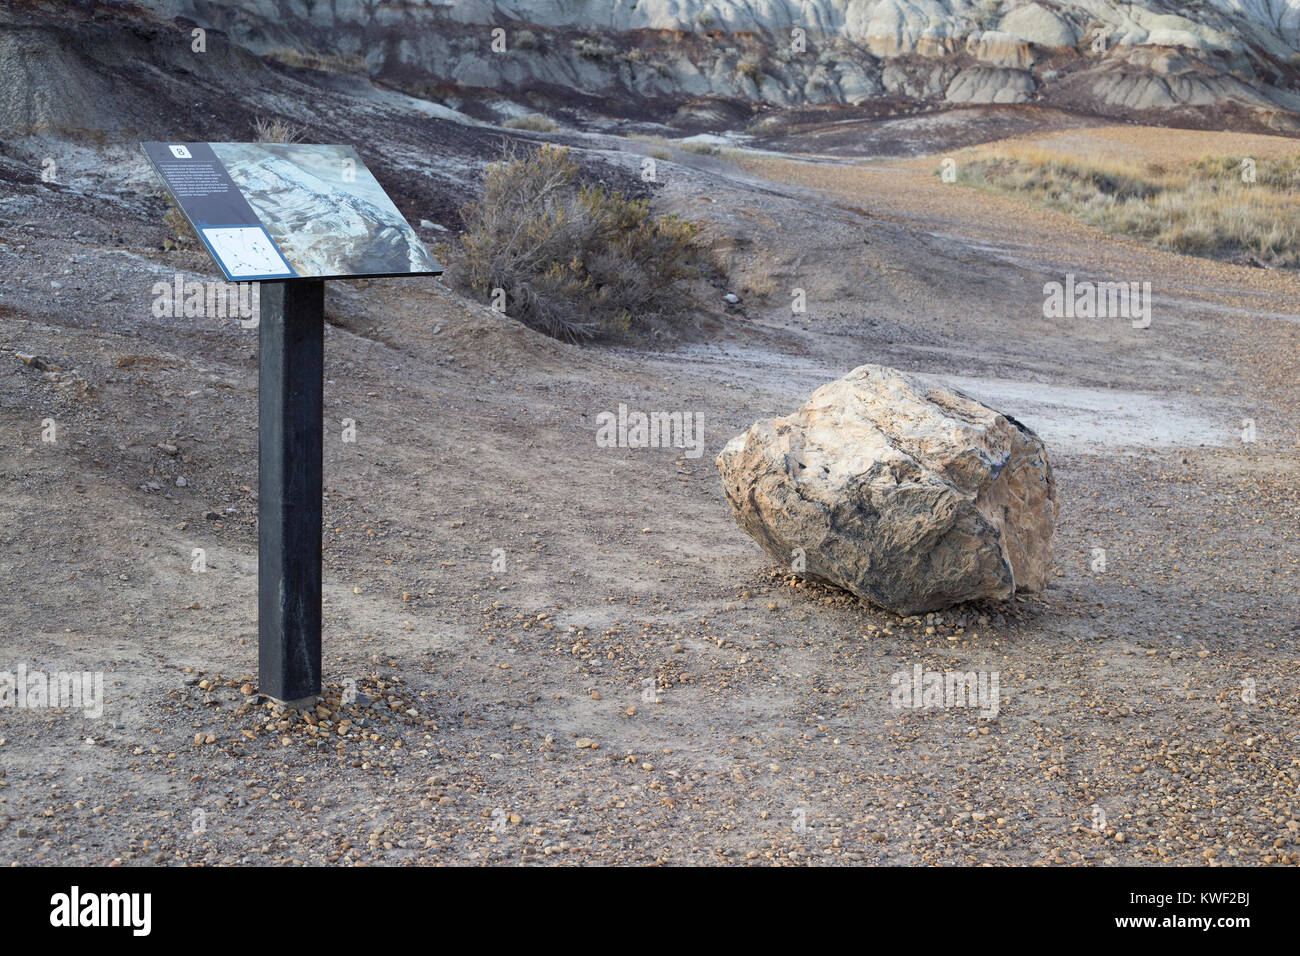 Fossilized Giant Redwood tree stump (Sequoiadendron) with interpretive sign on self-guided trail in Alberta badlands Stock Photo